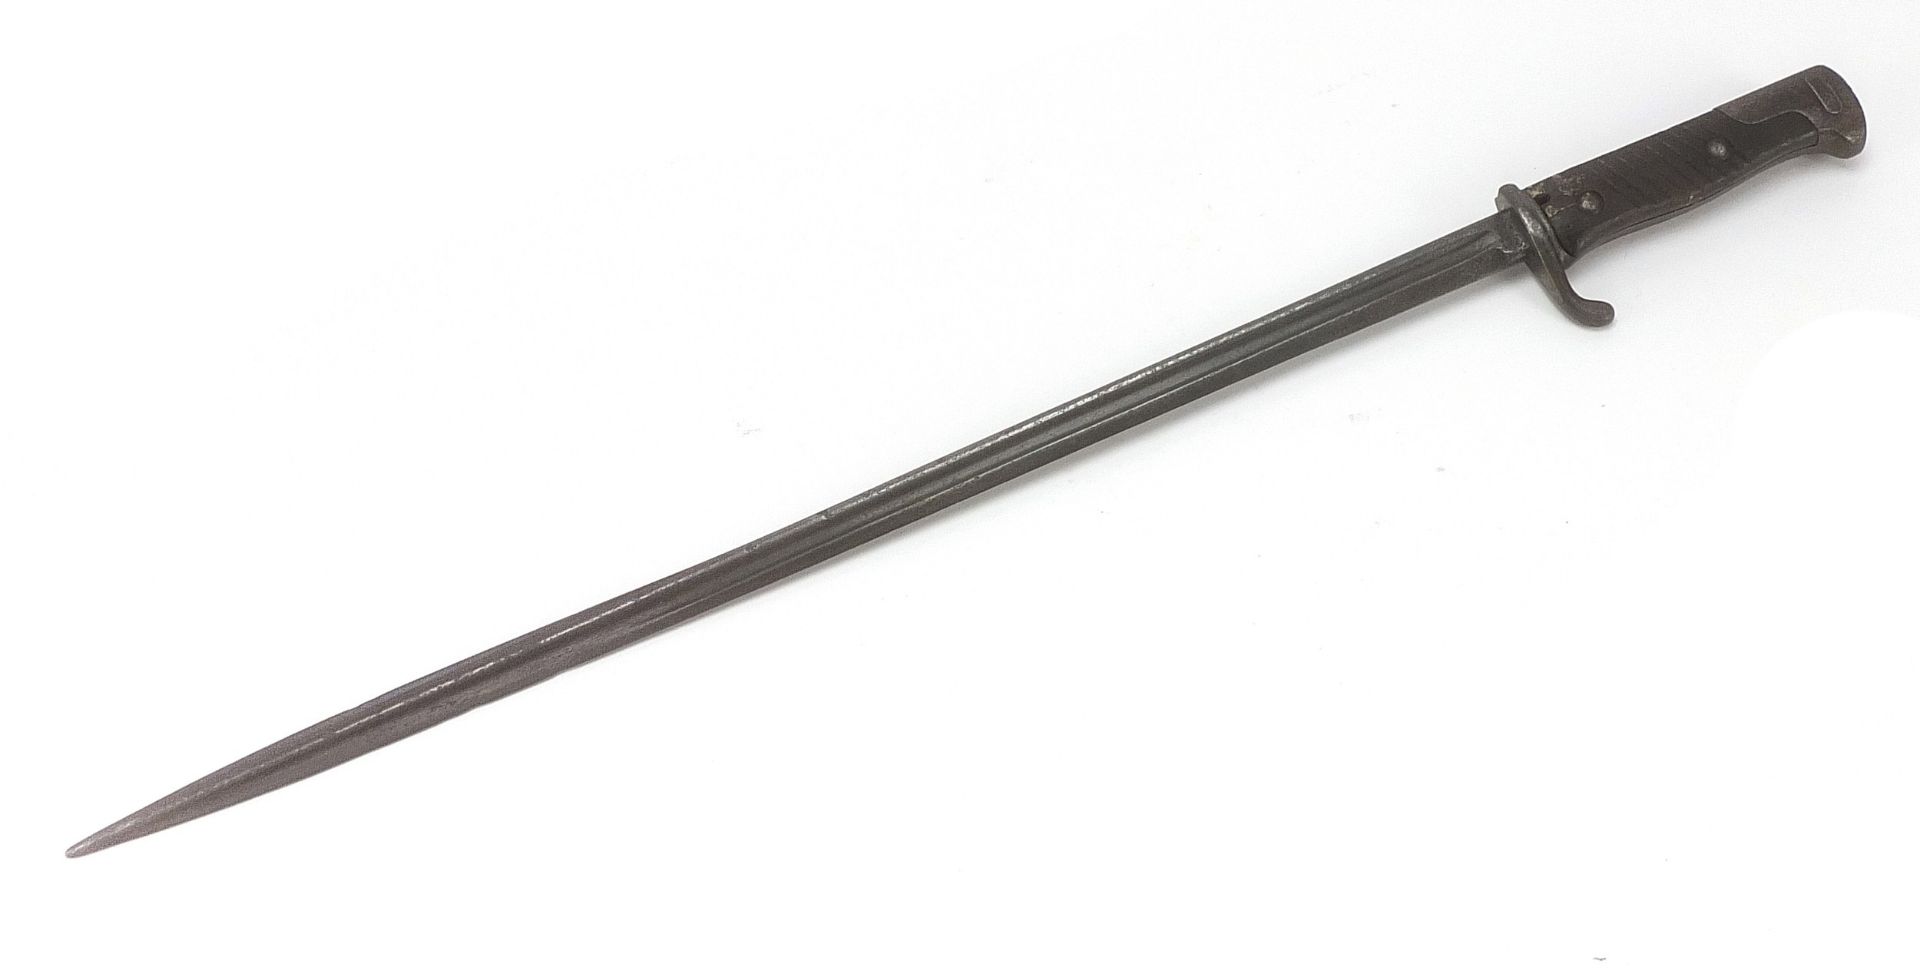 German military interest S98 bayonet, 64cm in length - Image 2 of 4